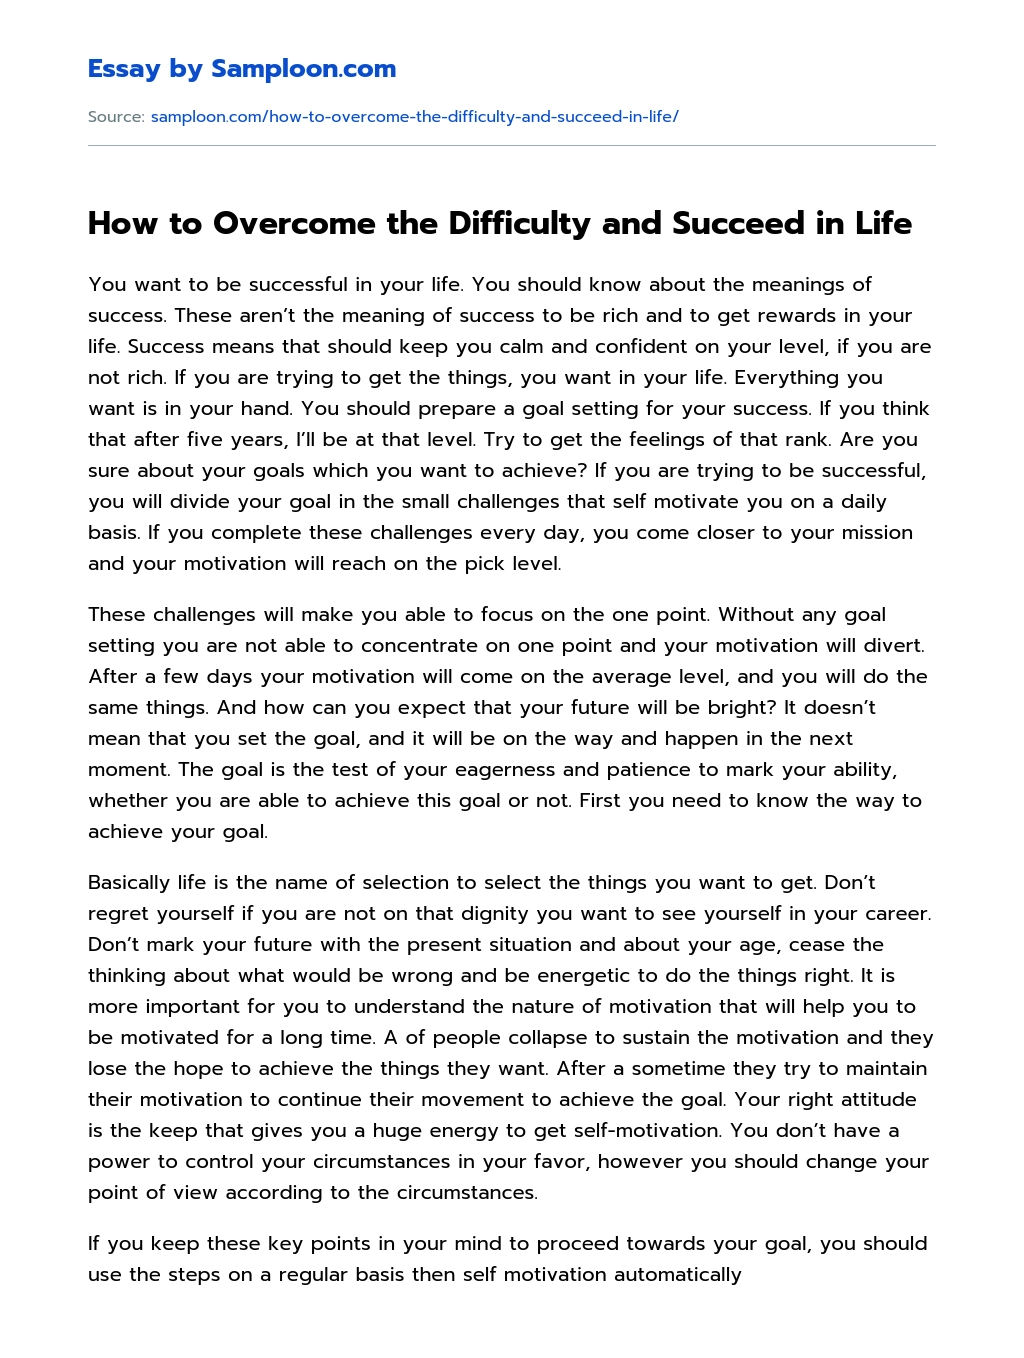 How to Overcome the Difficulty and Succeed in Life essay